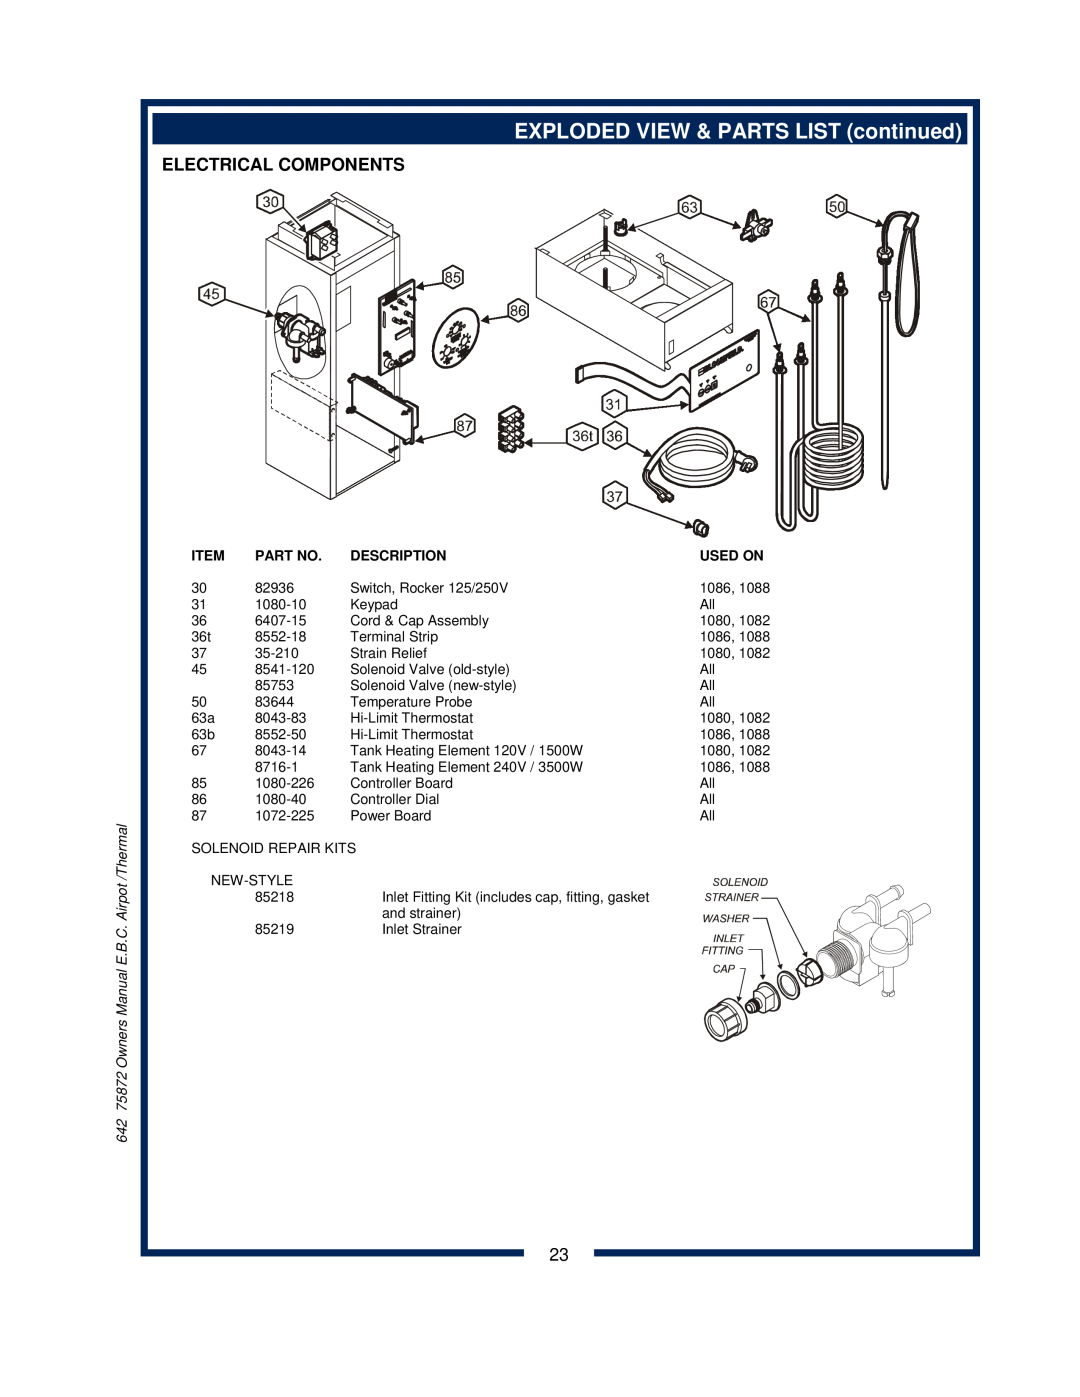 Bloomfield 1086, 1080, 1082XL, 1088 EXPLODED VIEW & PARTS LIST continued, Electrical Components, Description, Used On 